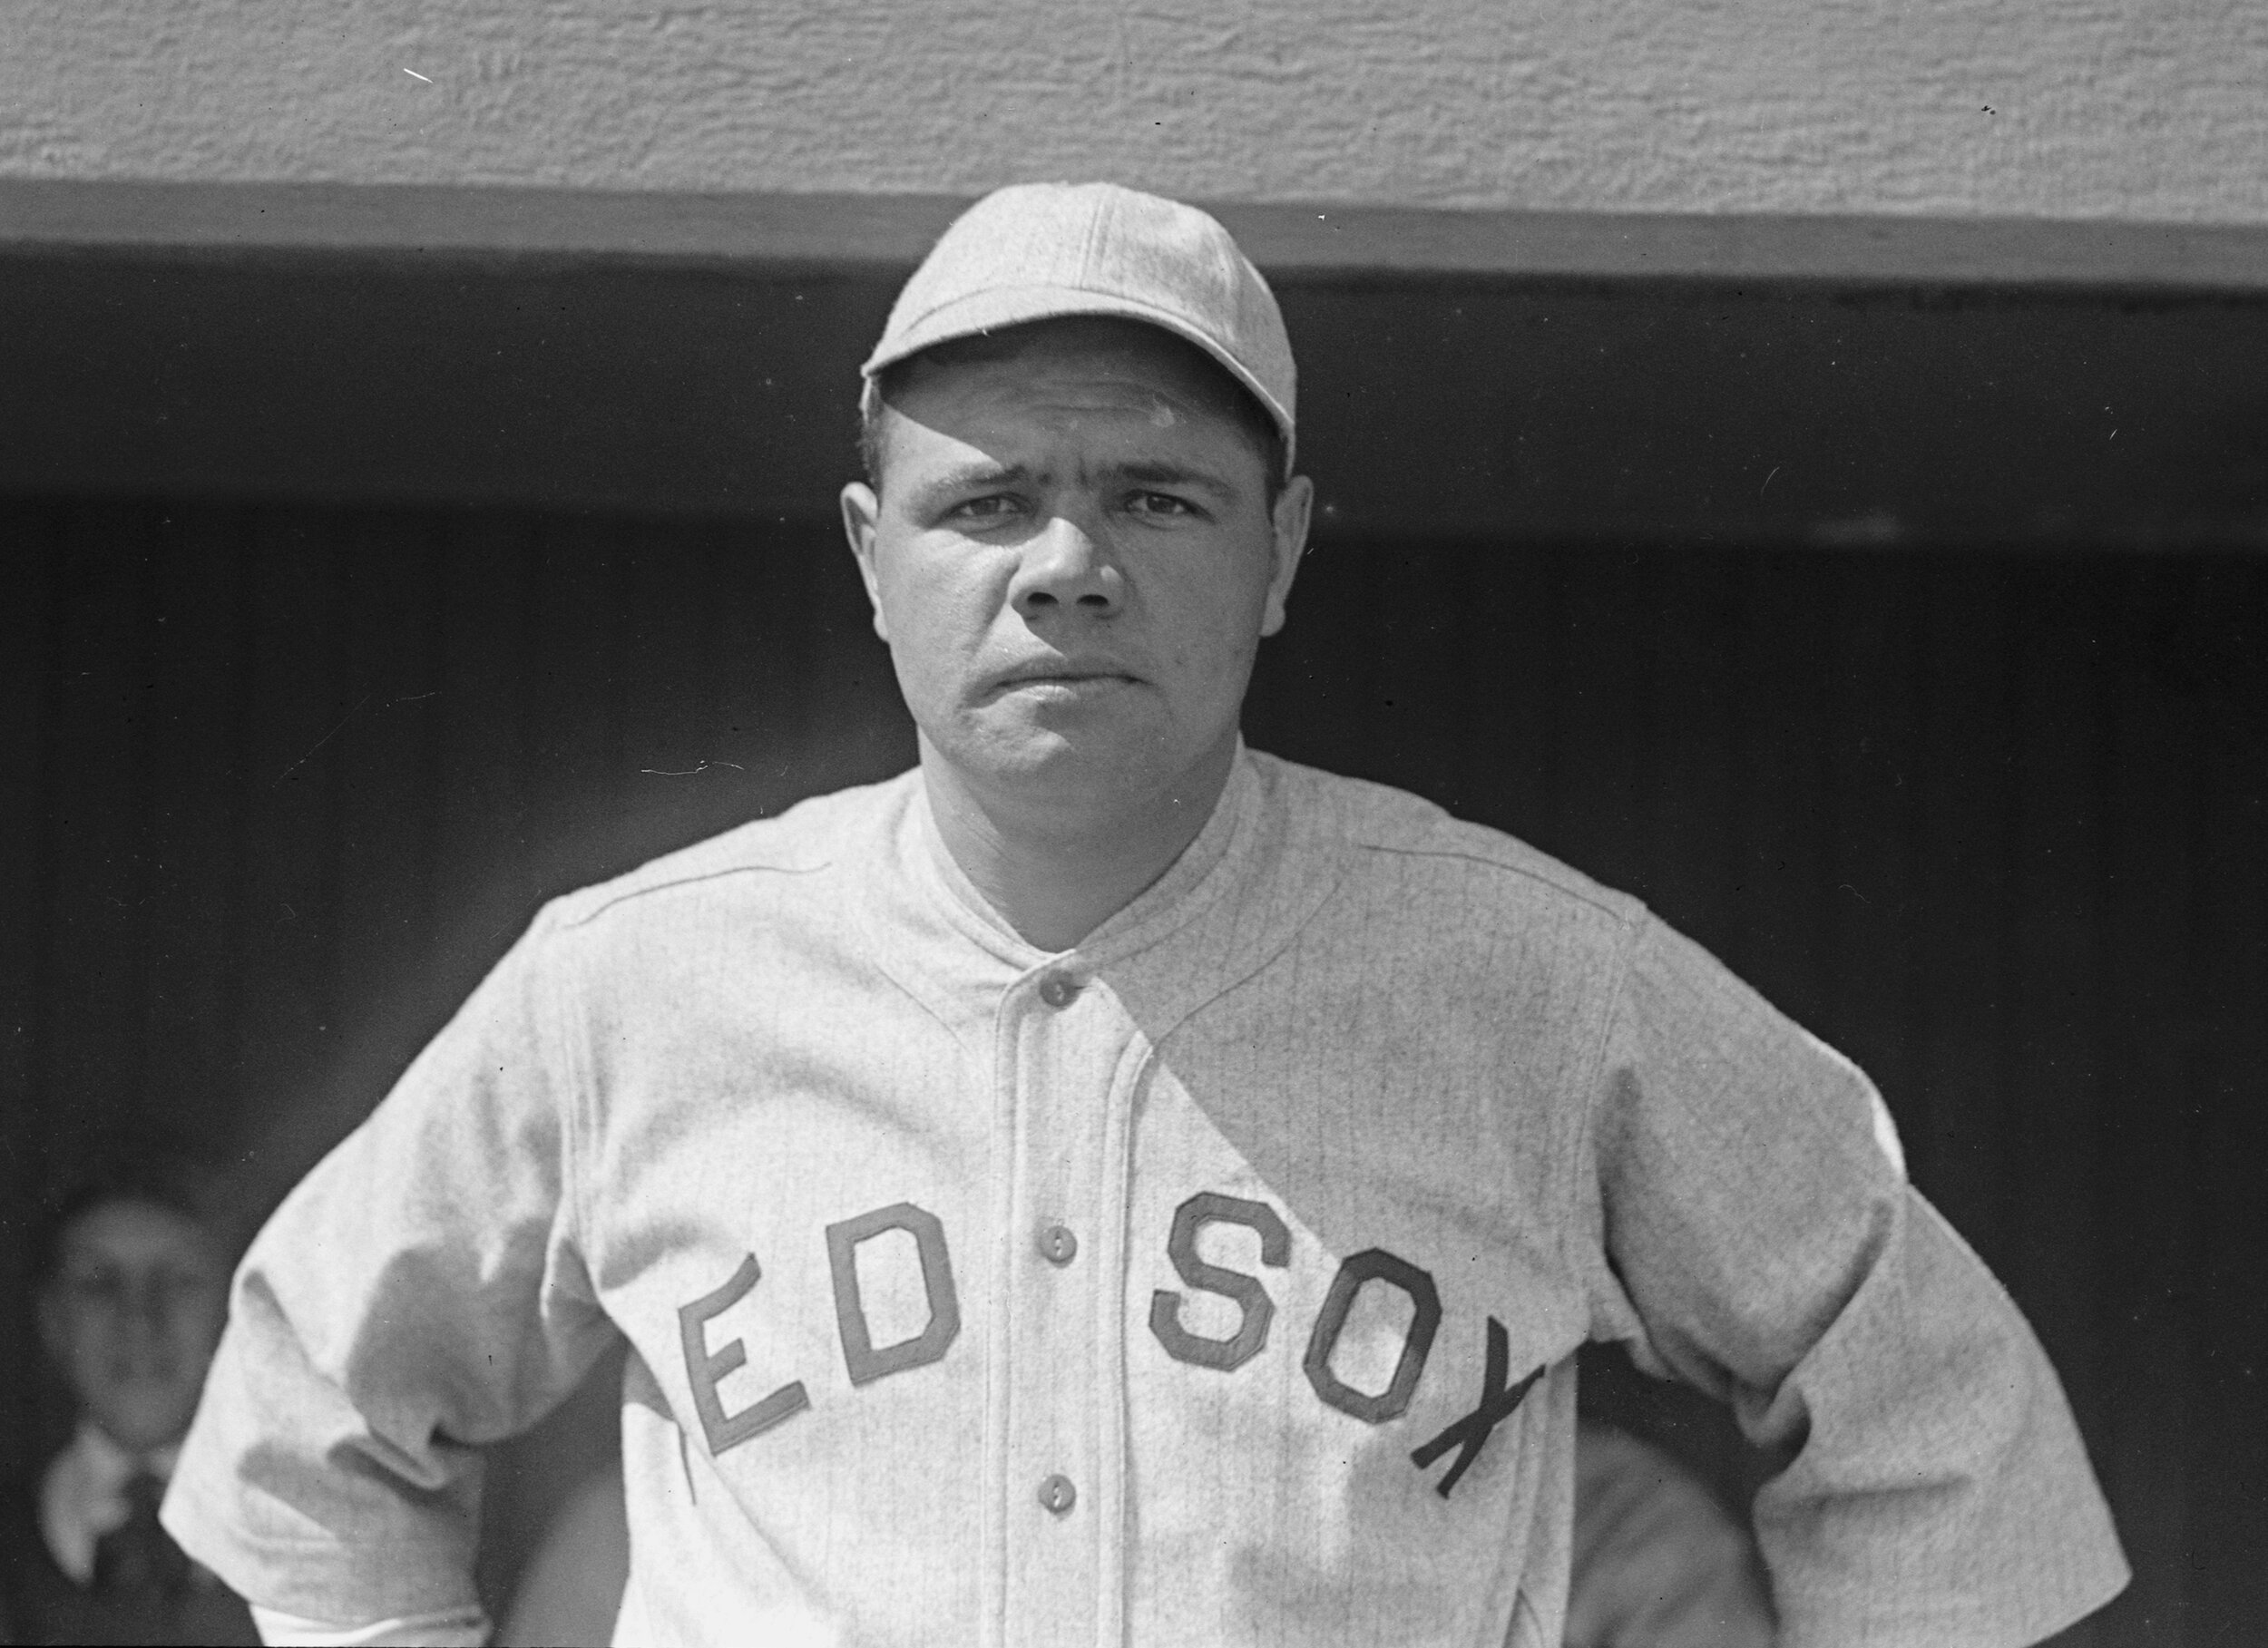 Babe Ruth Member of the Red Sox